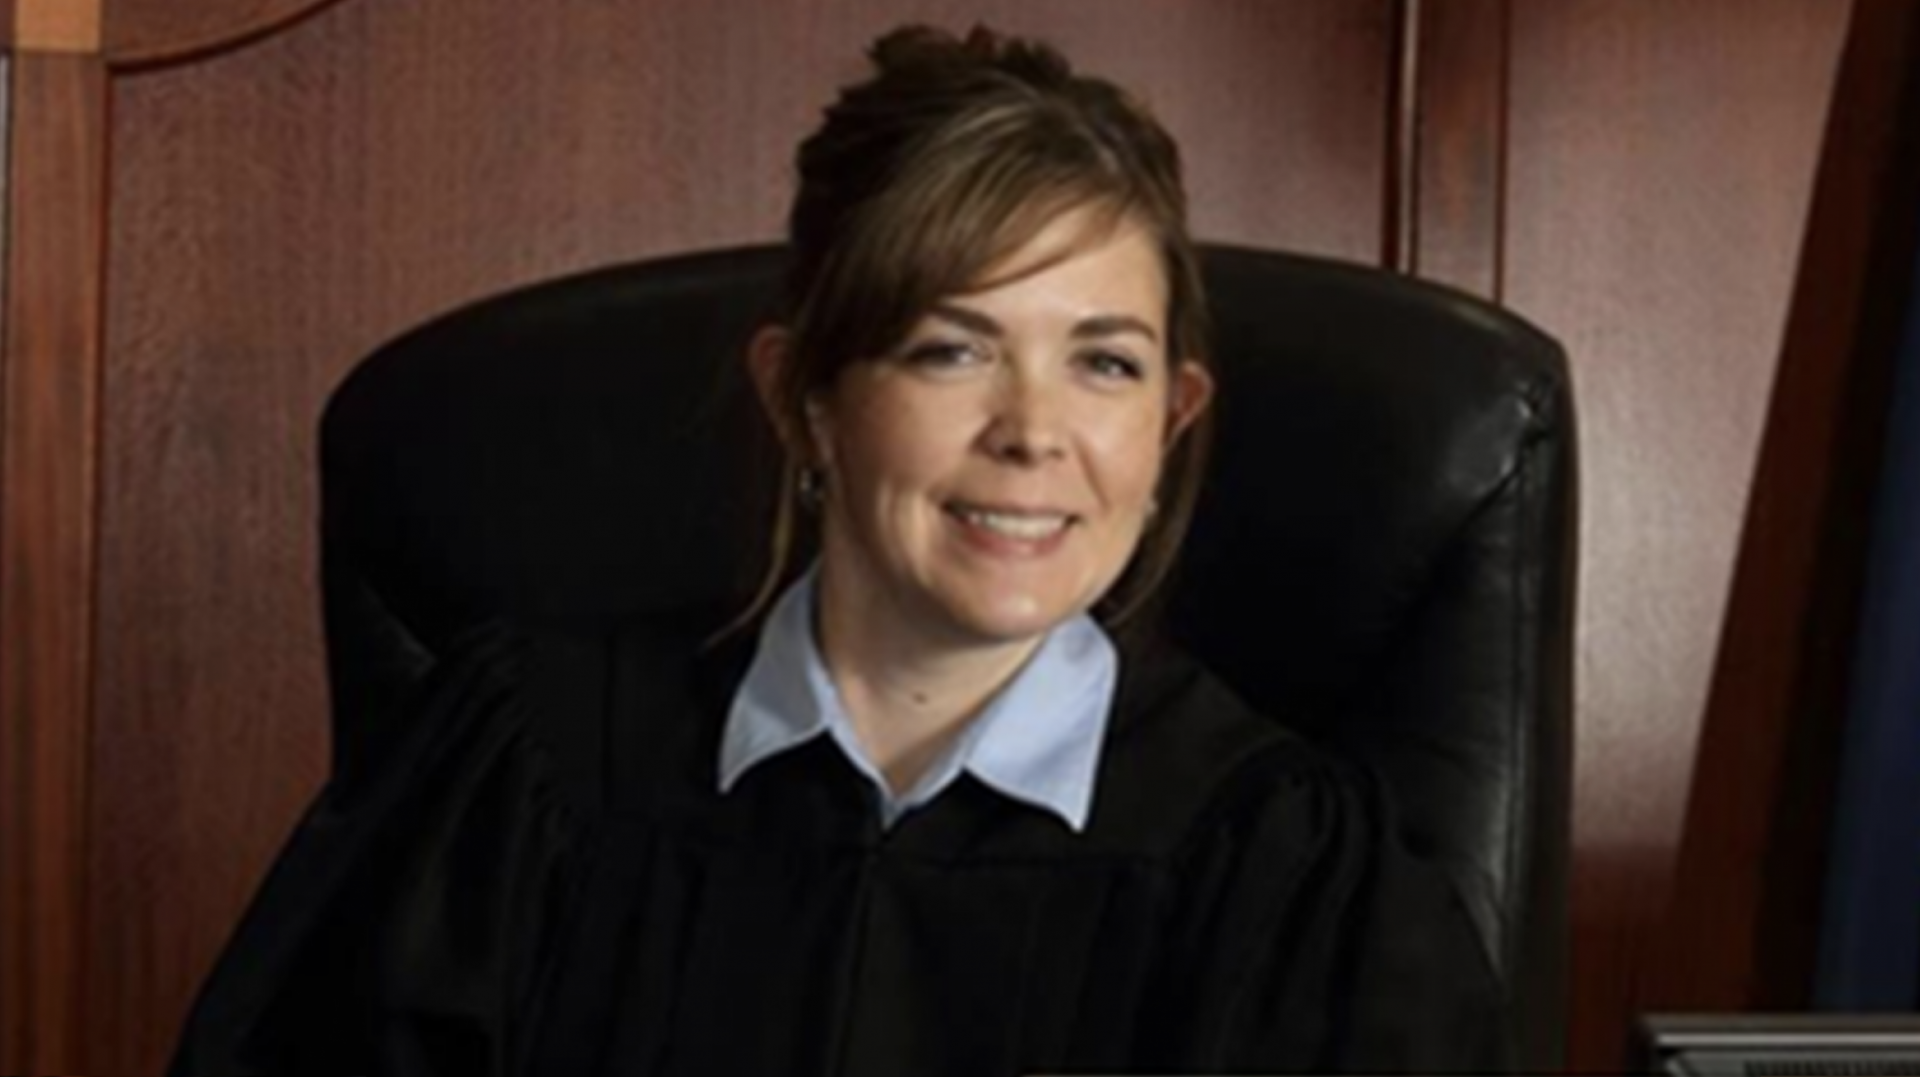 Judge fired for threesome